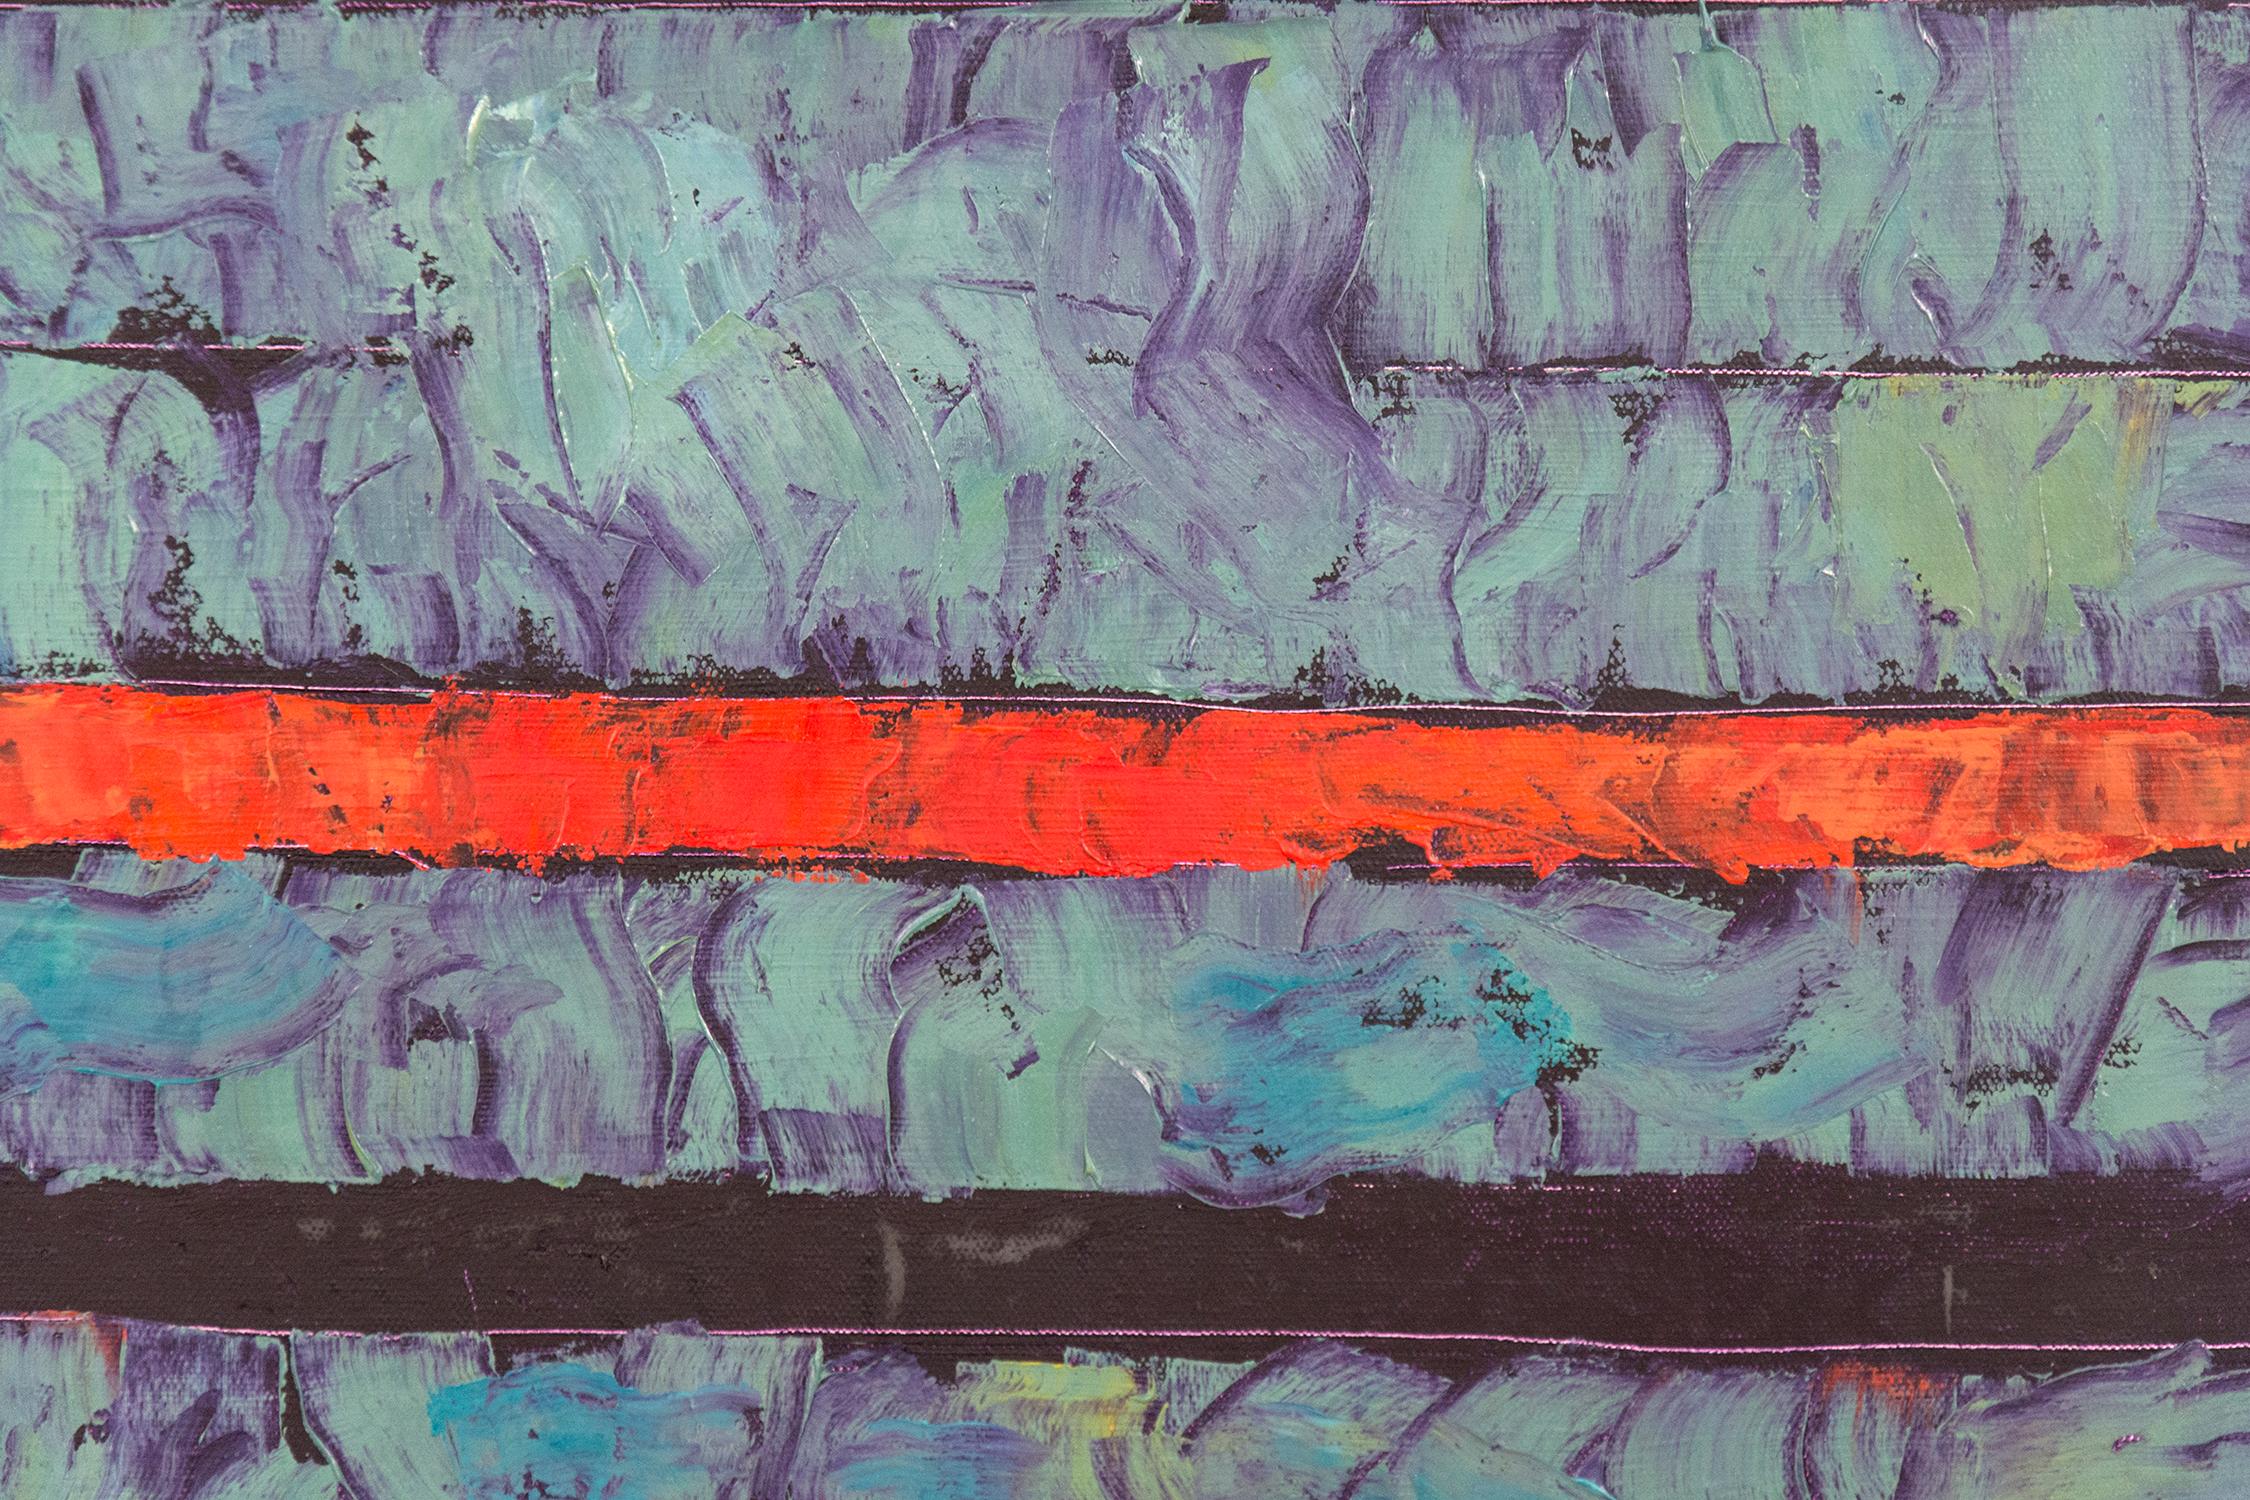 Entry 1: Green/Violet/Orange - large, bold, colourful, abstract oil on canvas - Contemporary Painting by David Sorensen